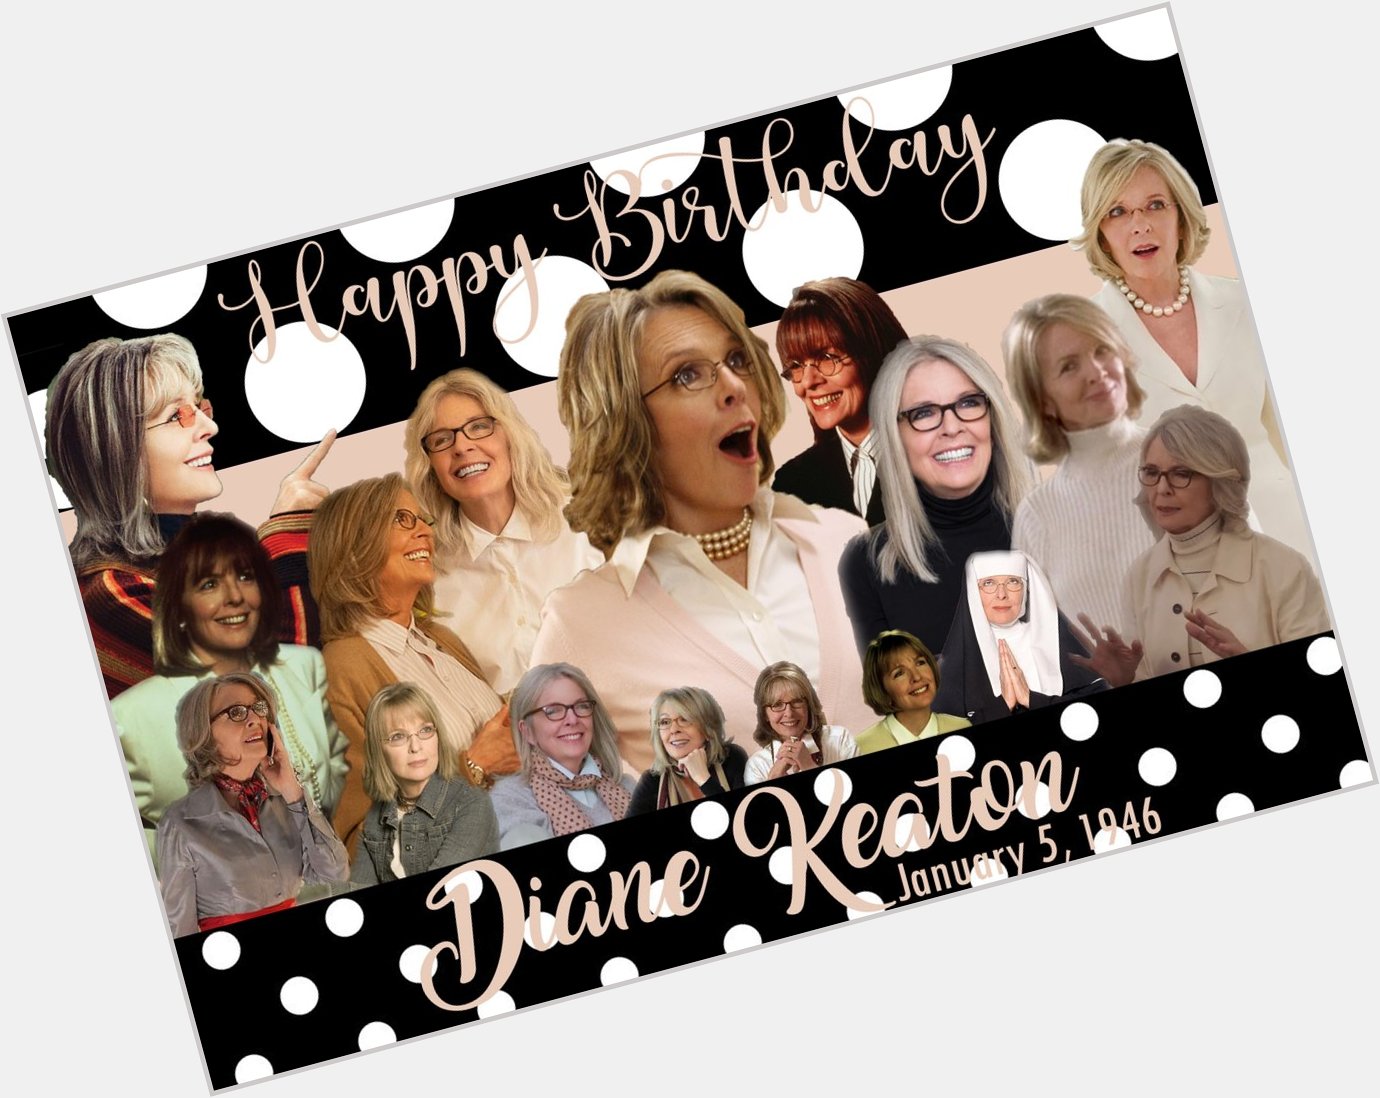 Happy Birthday, Diane Keaton!!
Thank You for playing so many great roles these are just a few of my favorites. 